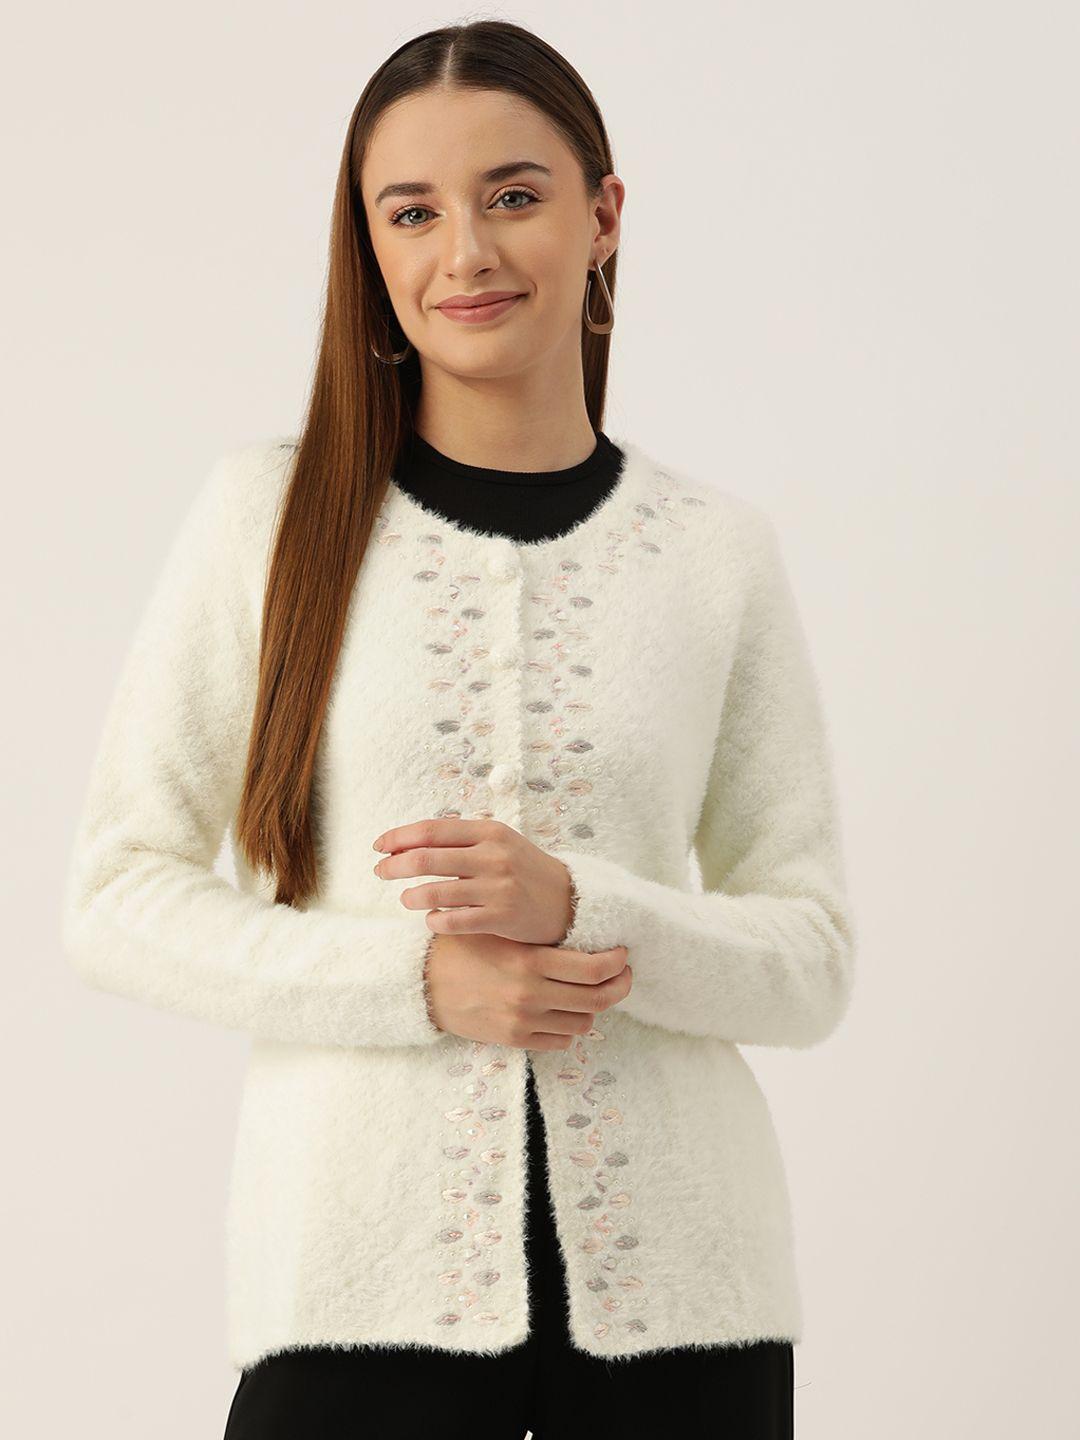 apsley women floral embroidered cardigan